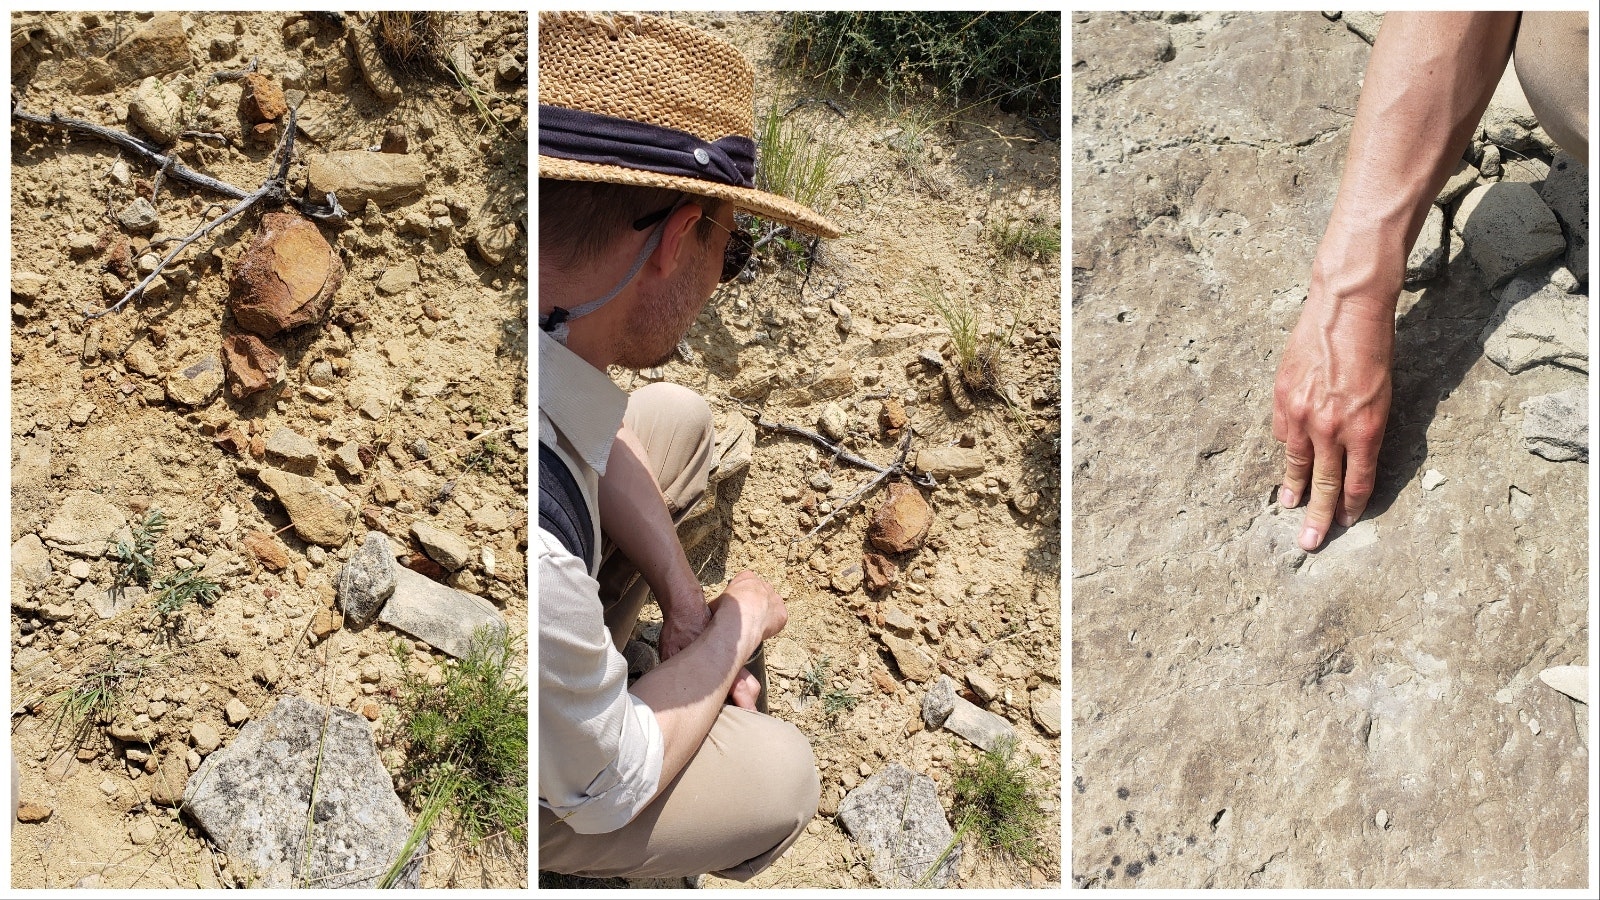 Left: Broken pieces of fossils on the surface of the ground are sometimes indicators that more might lie beneath; center: Bill Matteson examines the ground in a different area of Sheridan's quarry, where fossils are red-tinted instead of black; right: These dinosaur tracks show some sort of three-toed creature once passed through the area millions of years ago.